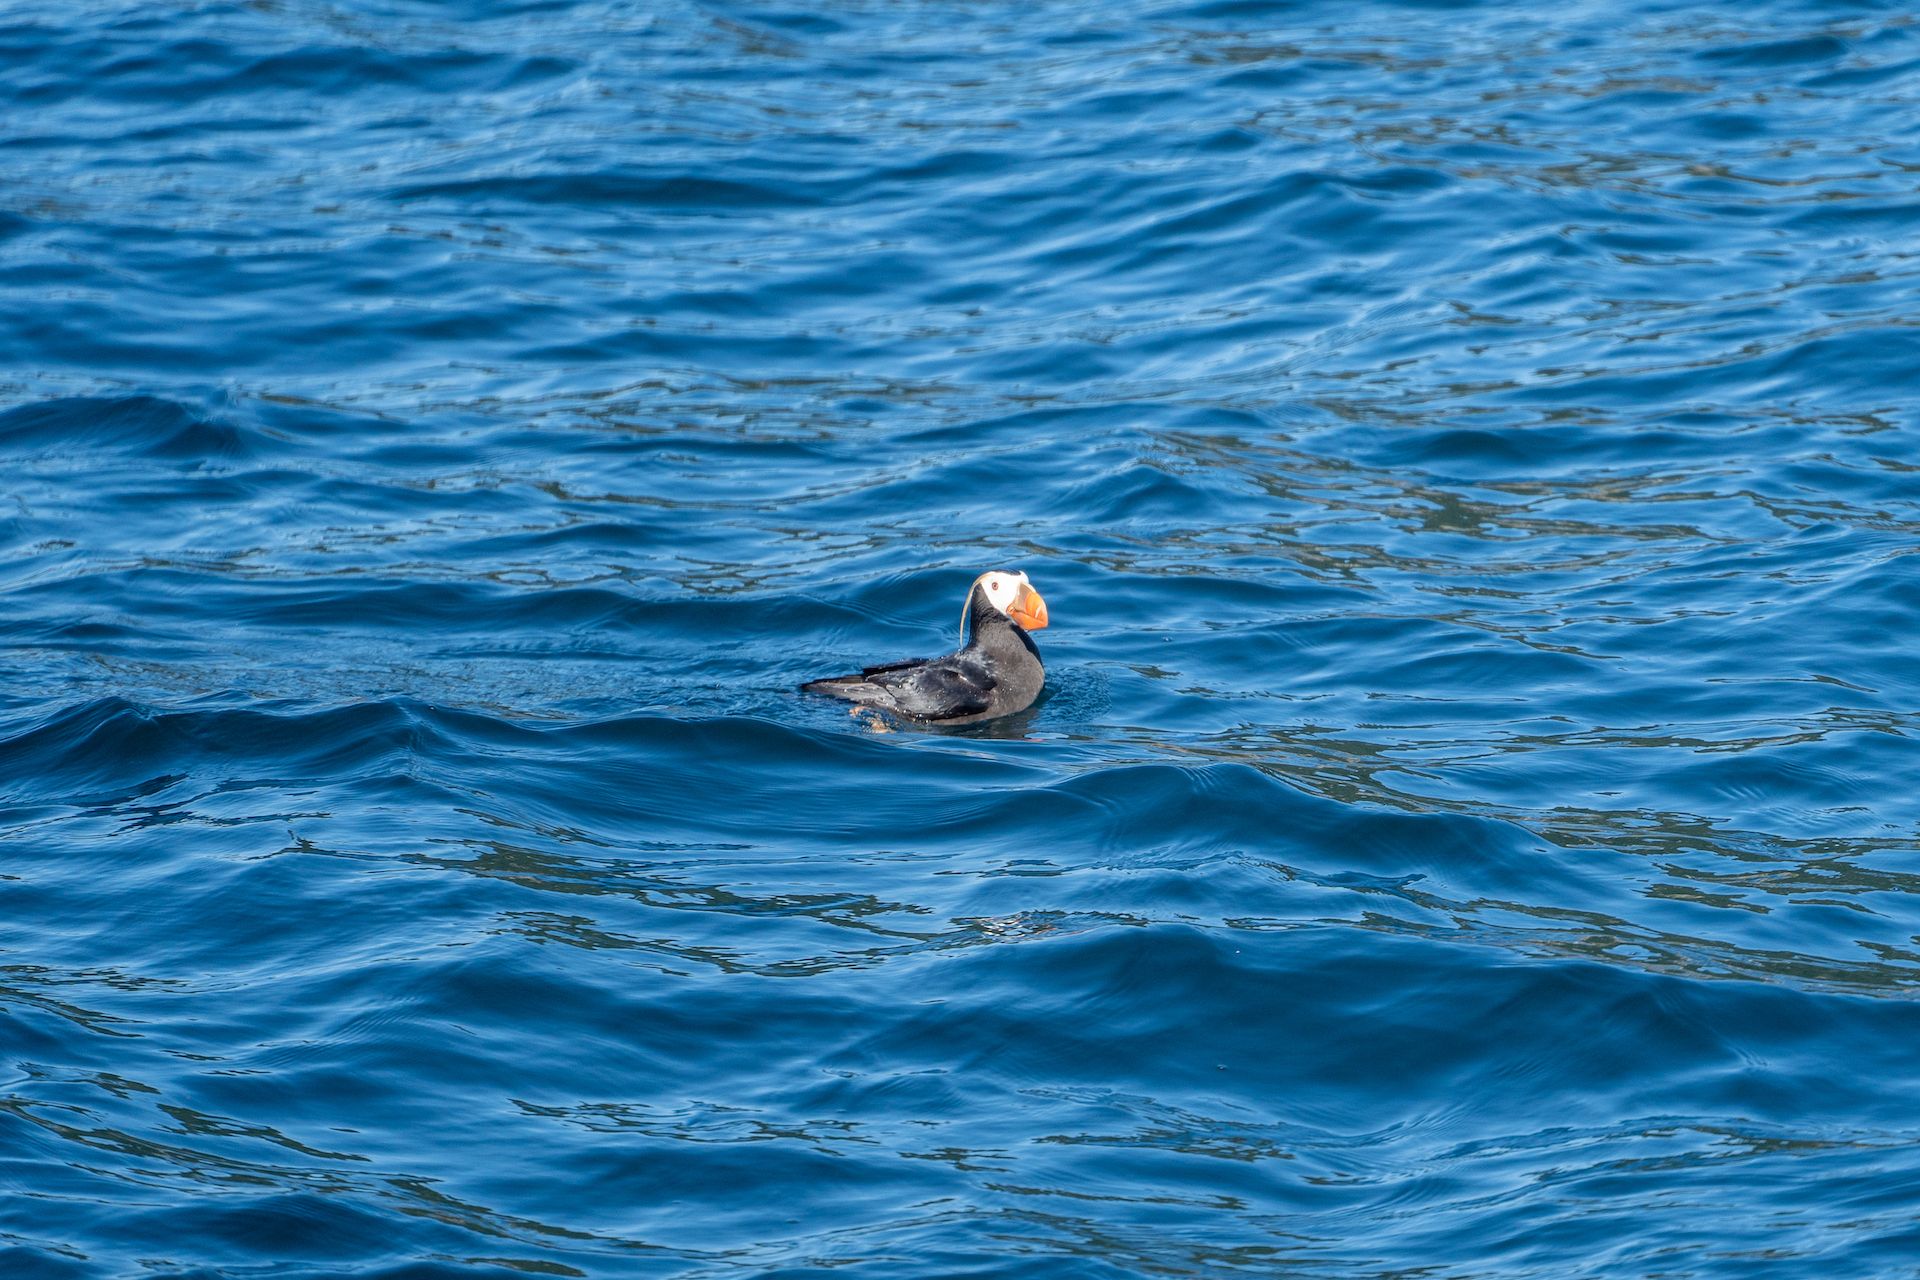 A petit mignon (little cute) horned puffin. We learned that the bones of puffins are much denser than other seabirds to allow them to dive up to 100 feet under the water for food.